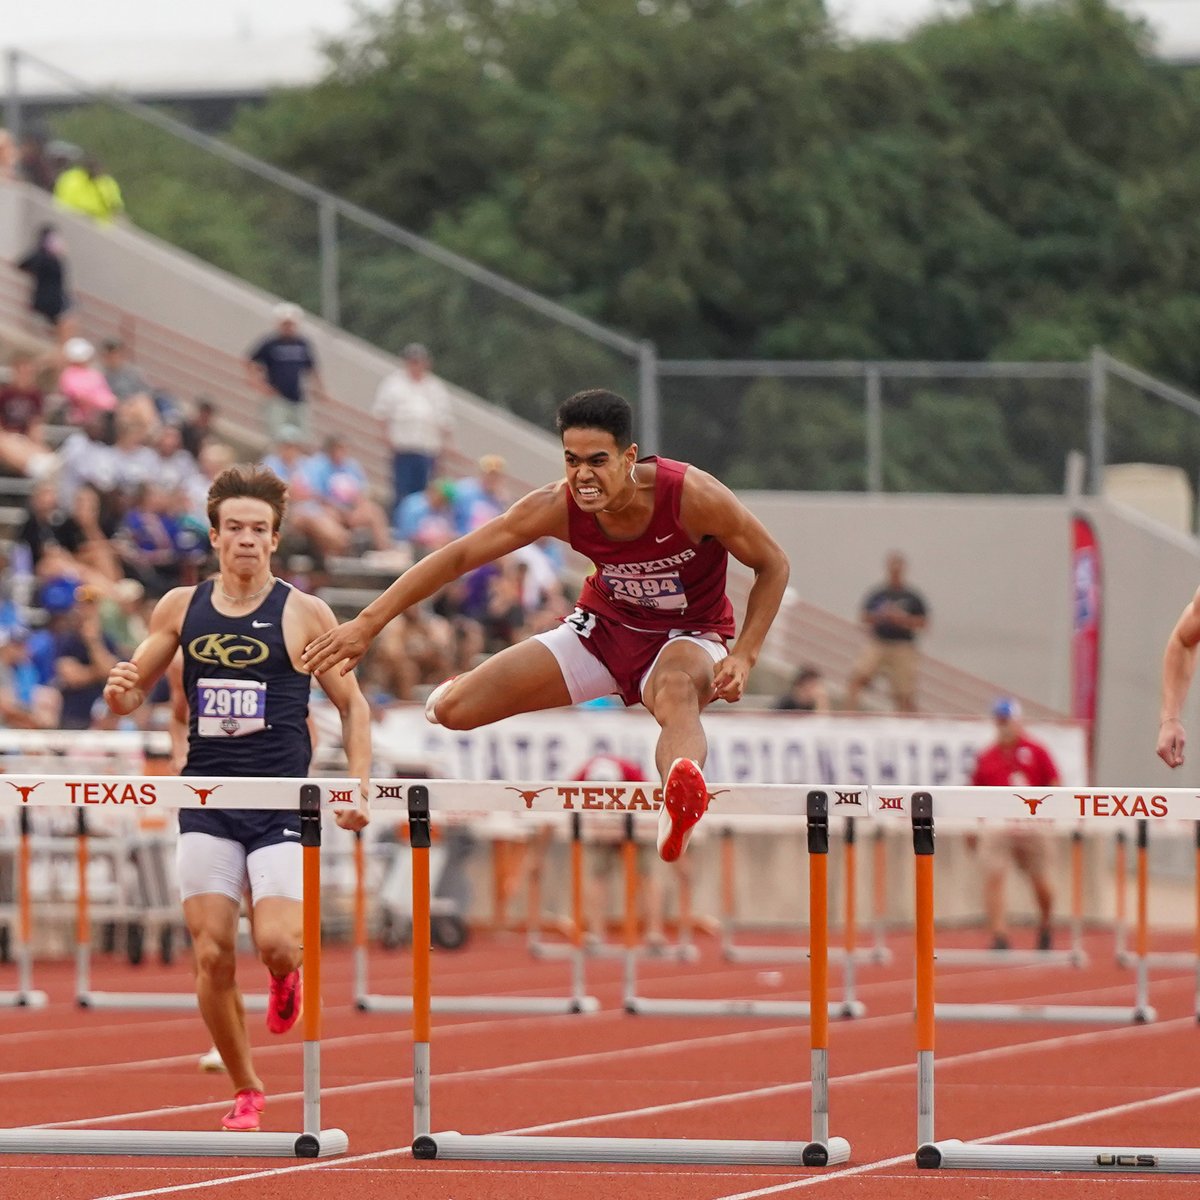 🥇 Jayden Keys (Katy Tompkins) earned Boys Conf 6A #UILState Track & Field Athlete of the Meet w/ 30 indiv. points, placing 1st in 300m Hurdles & Long Jump and 2nd in 110m Hurdles.